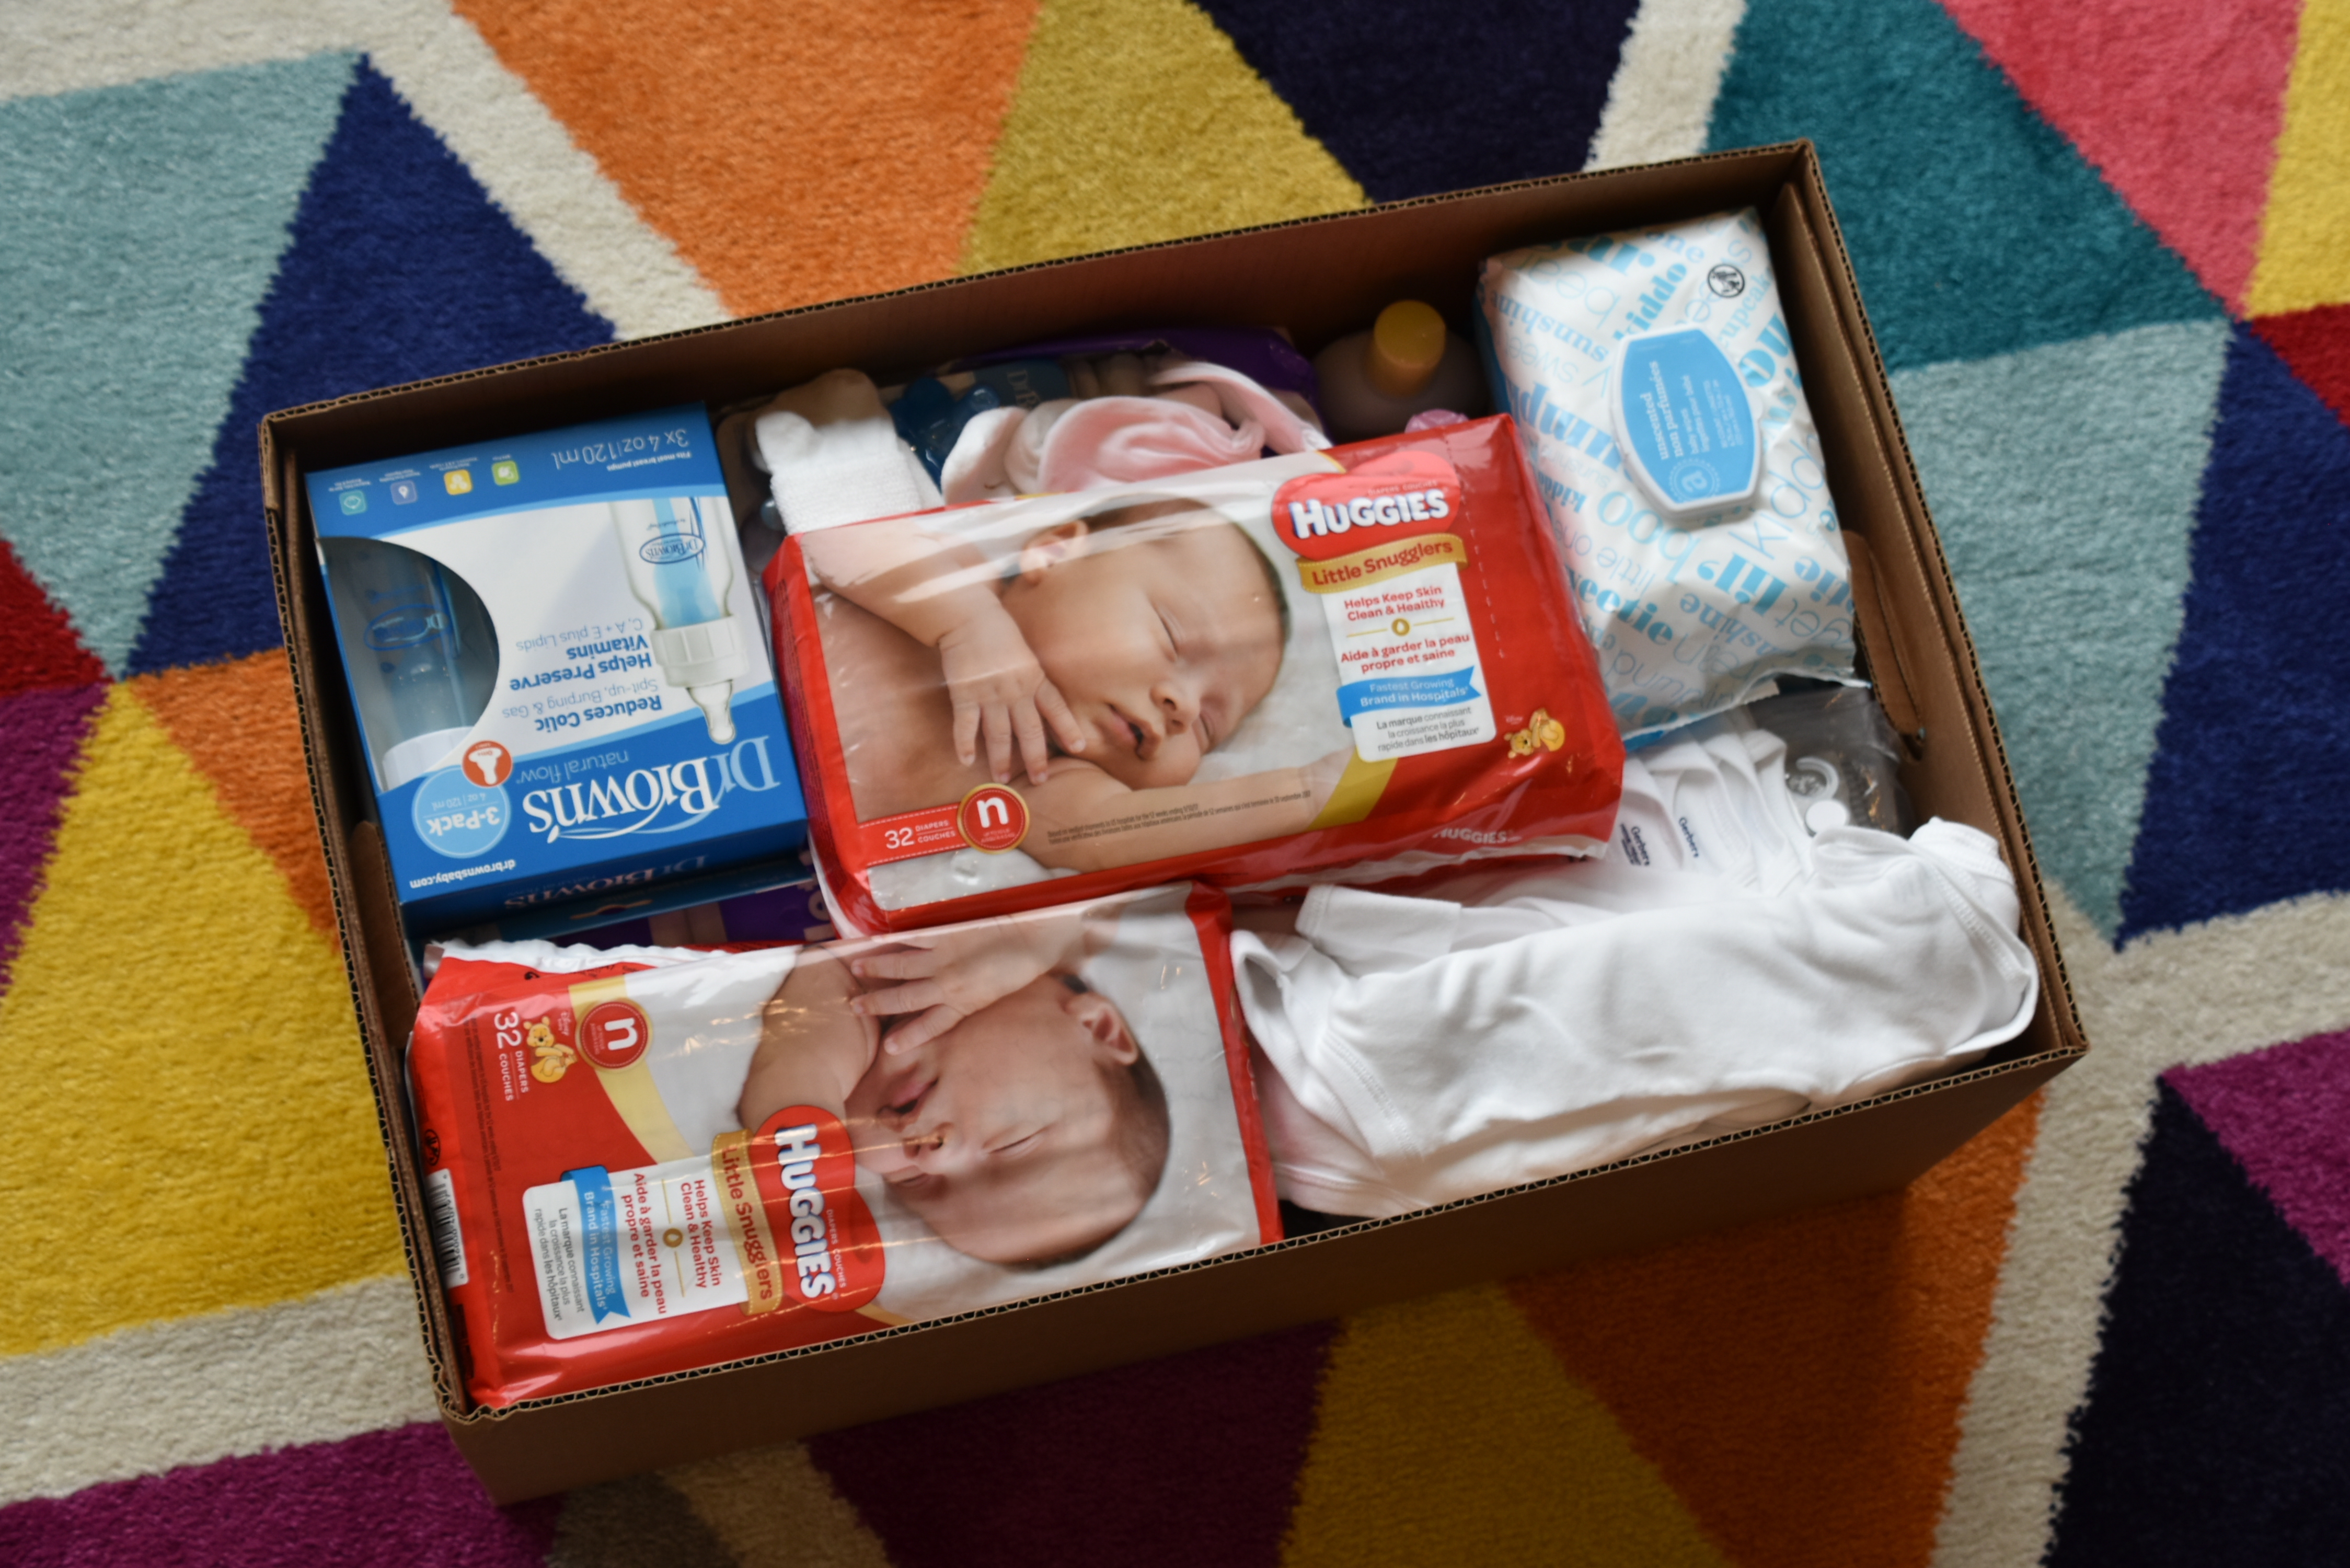 The Welcome Baby care package includes diapers, wipes, bottles, and more.   COURTESY CMEE